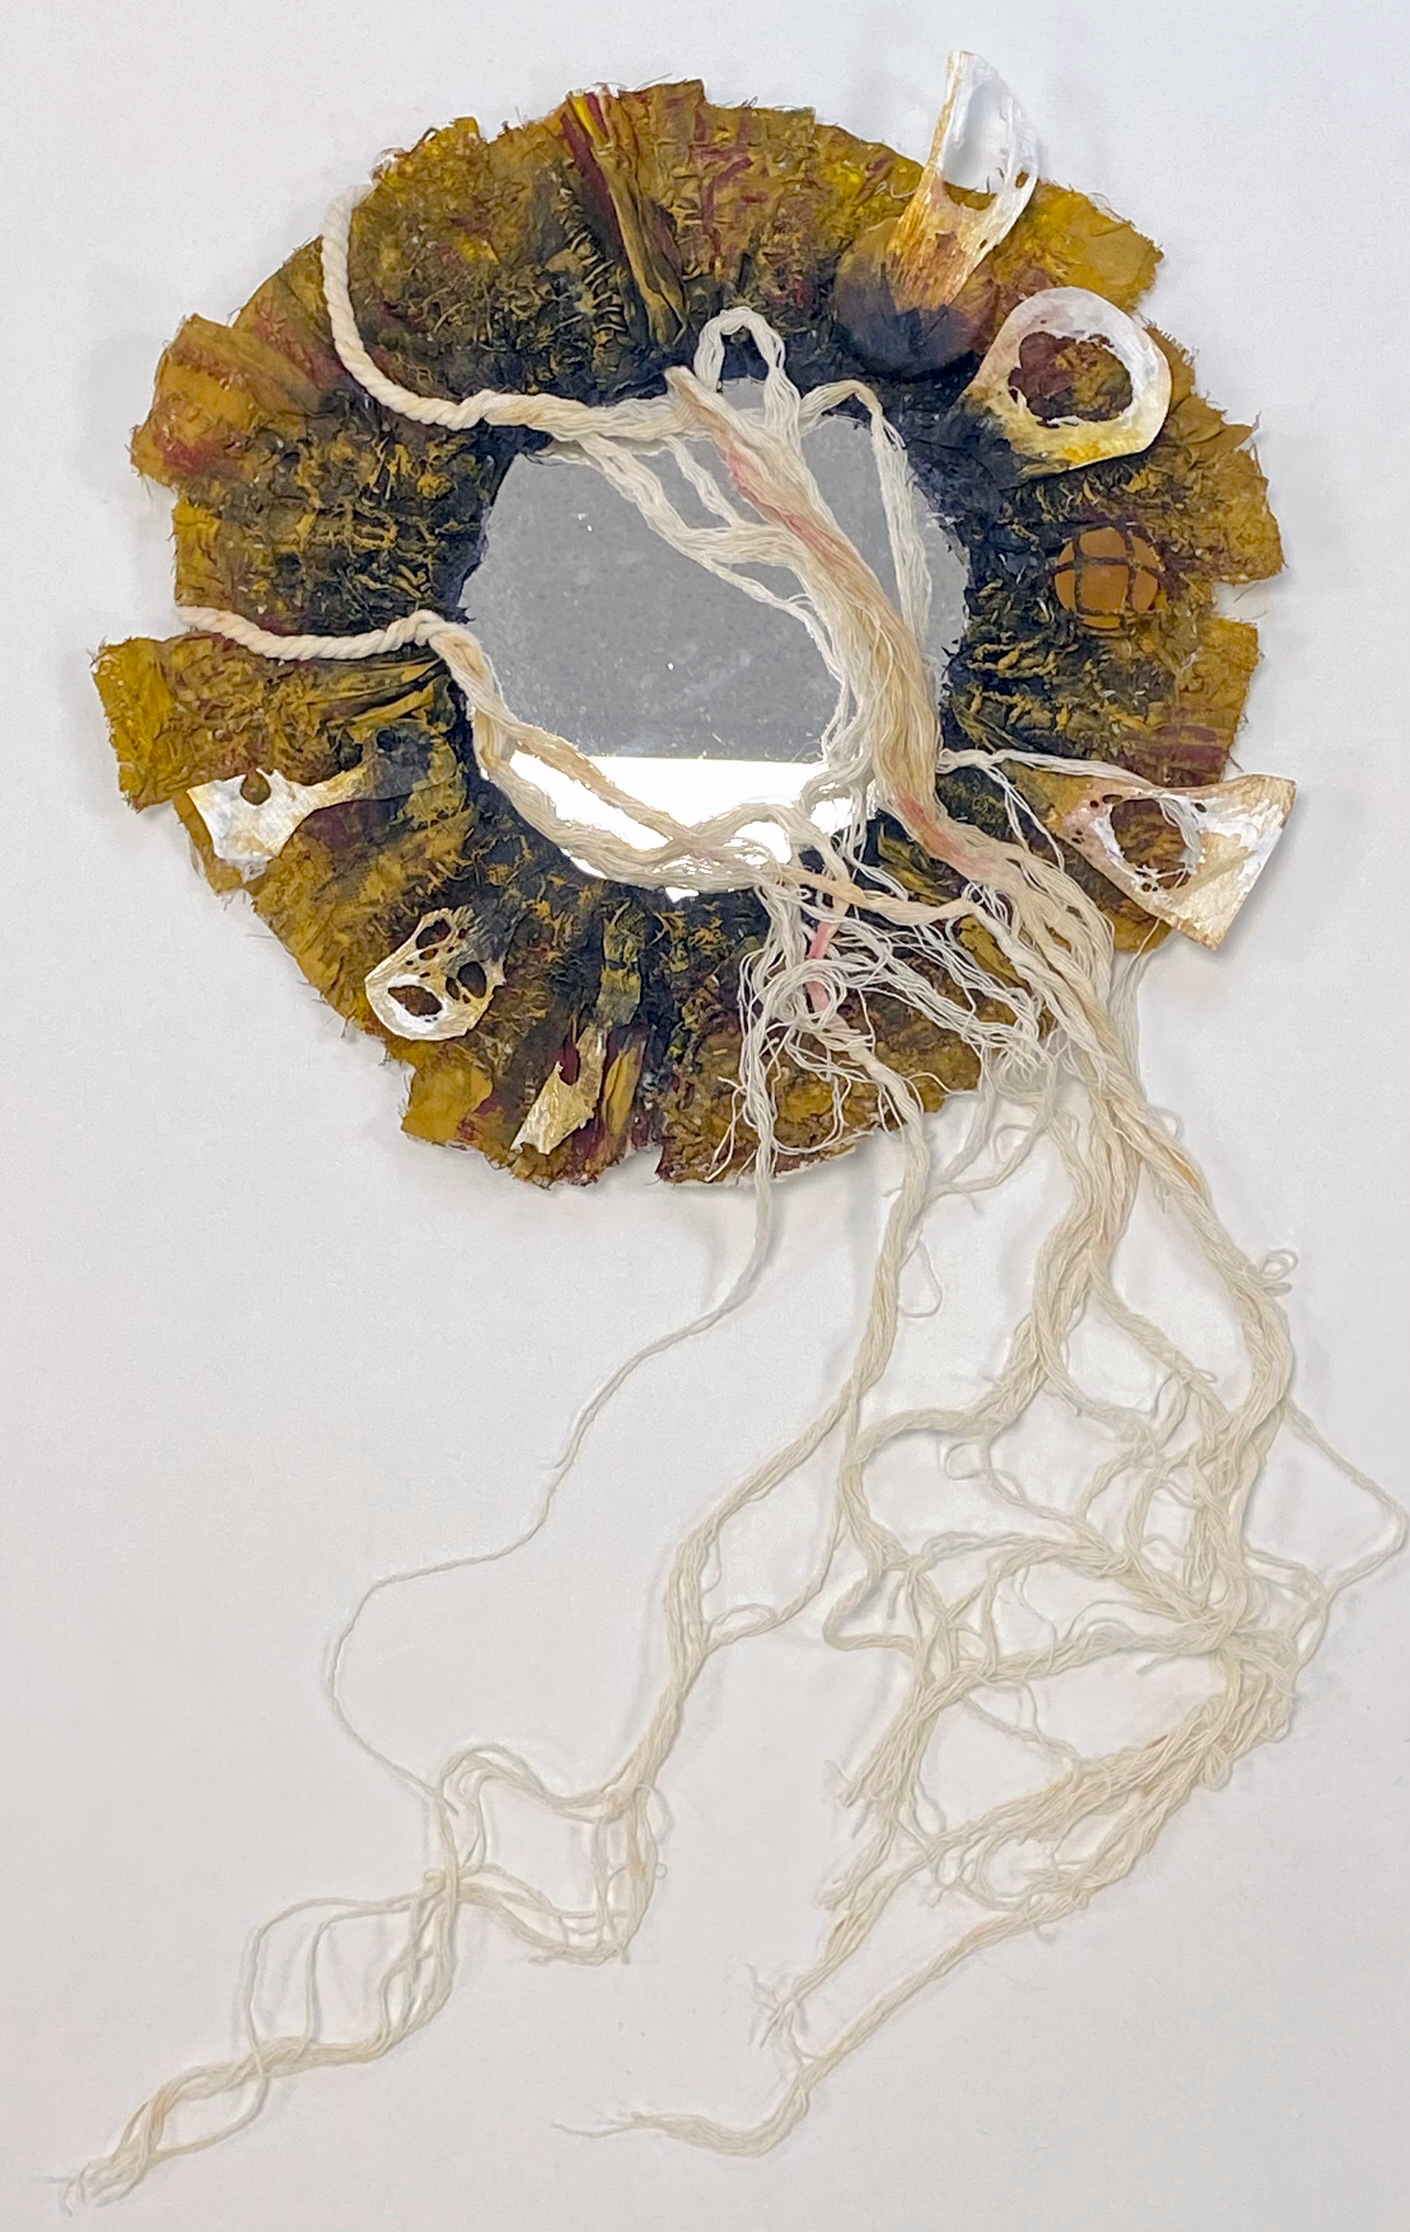 *Underland – Some Excavations*, mixed media textile and glass sculpture, deconstructed repurposed fabrics, found objects, acrylics, couched recycled rope thread, heated Tyvek and mirror, 60 x 30cm